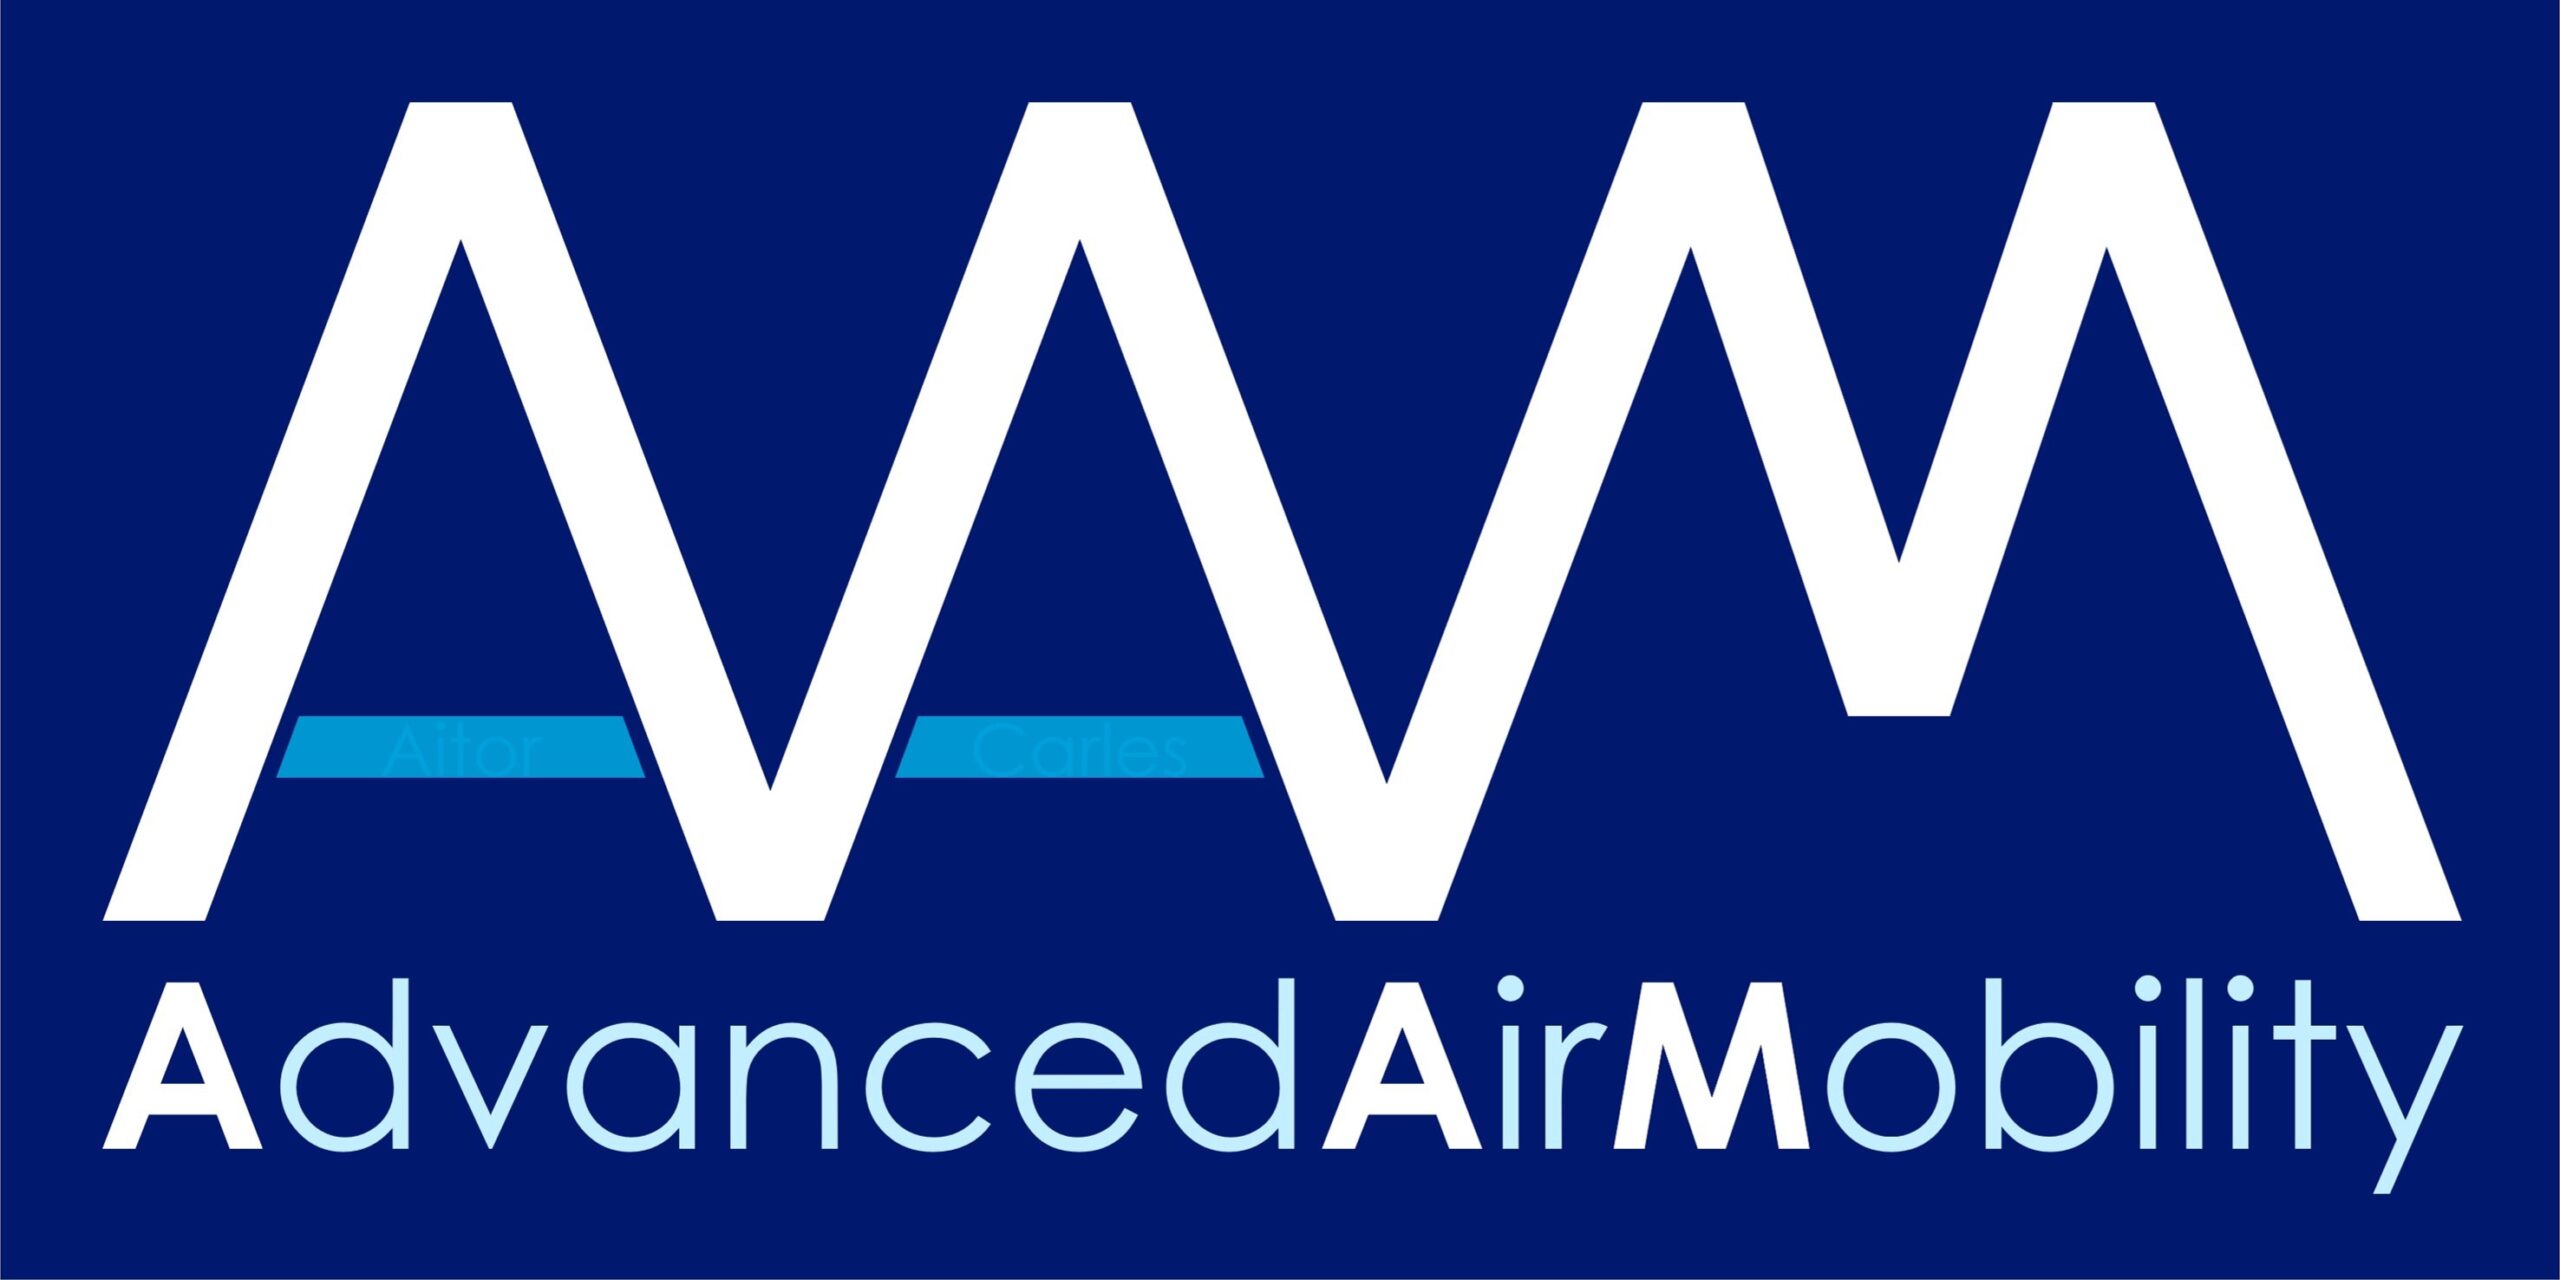 AAM Solution: The future of personal mobility is up in the air